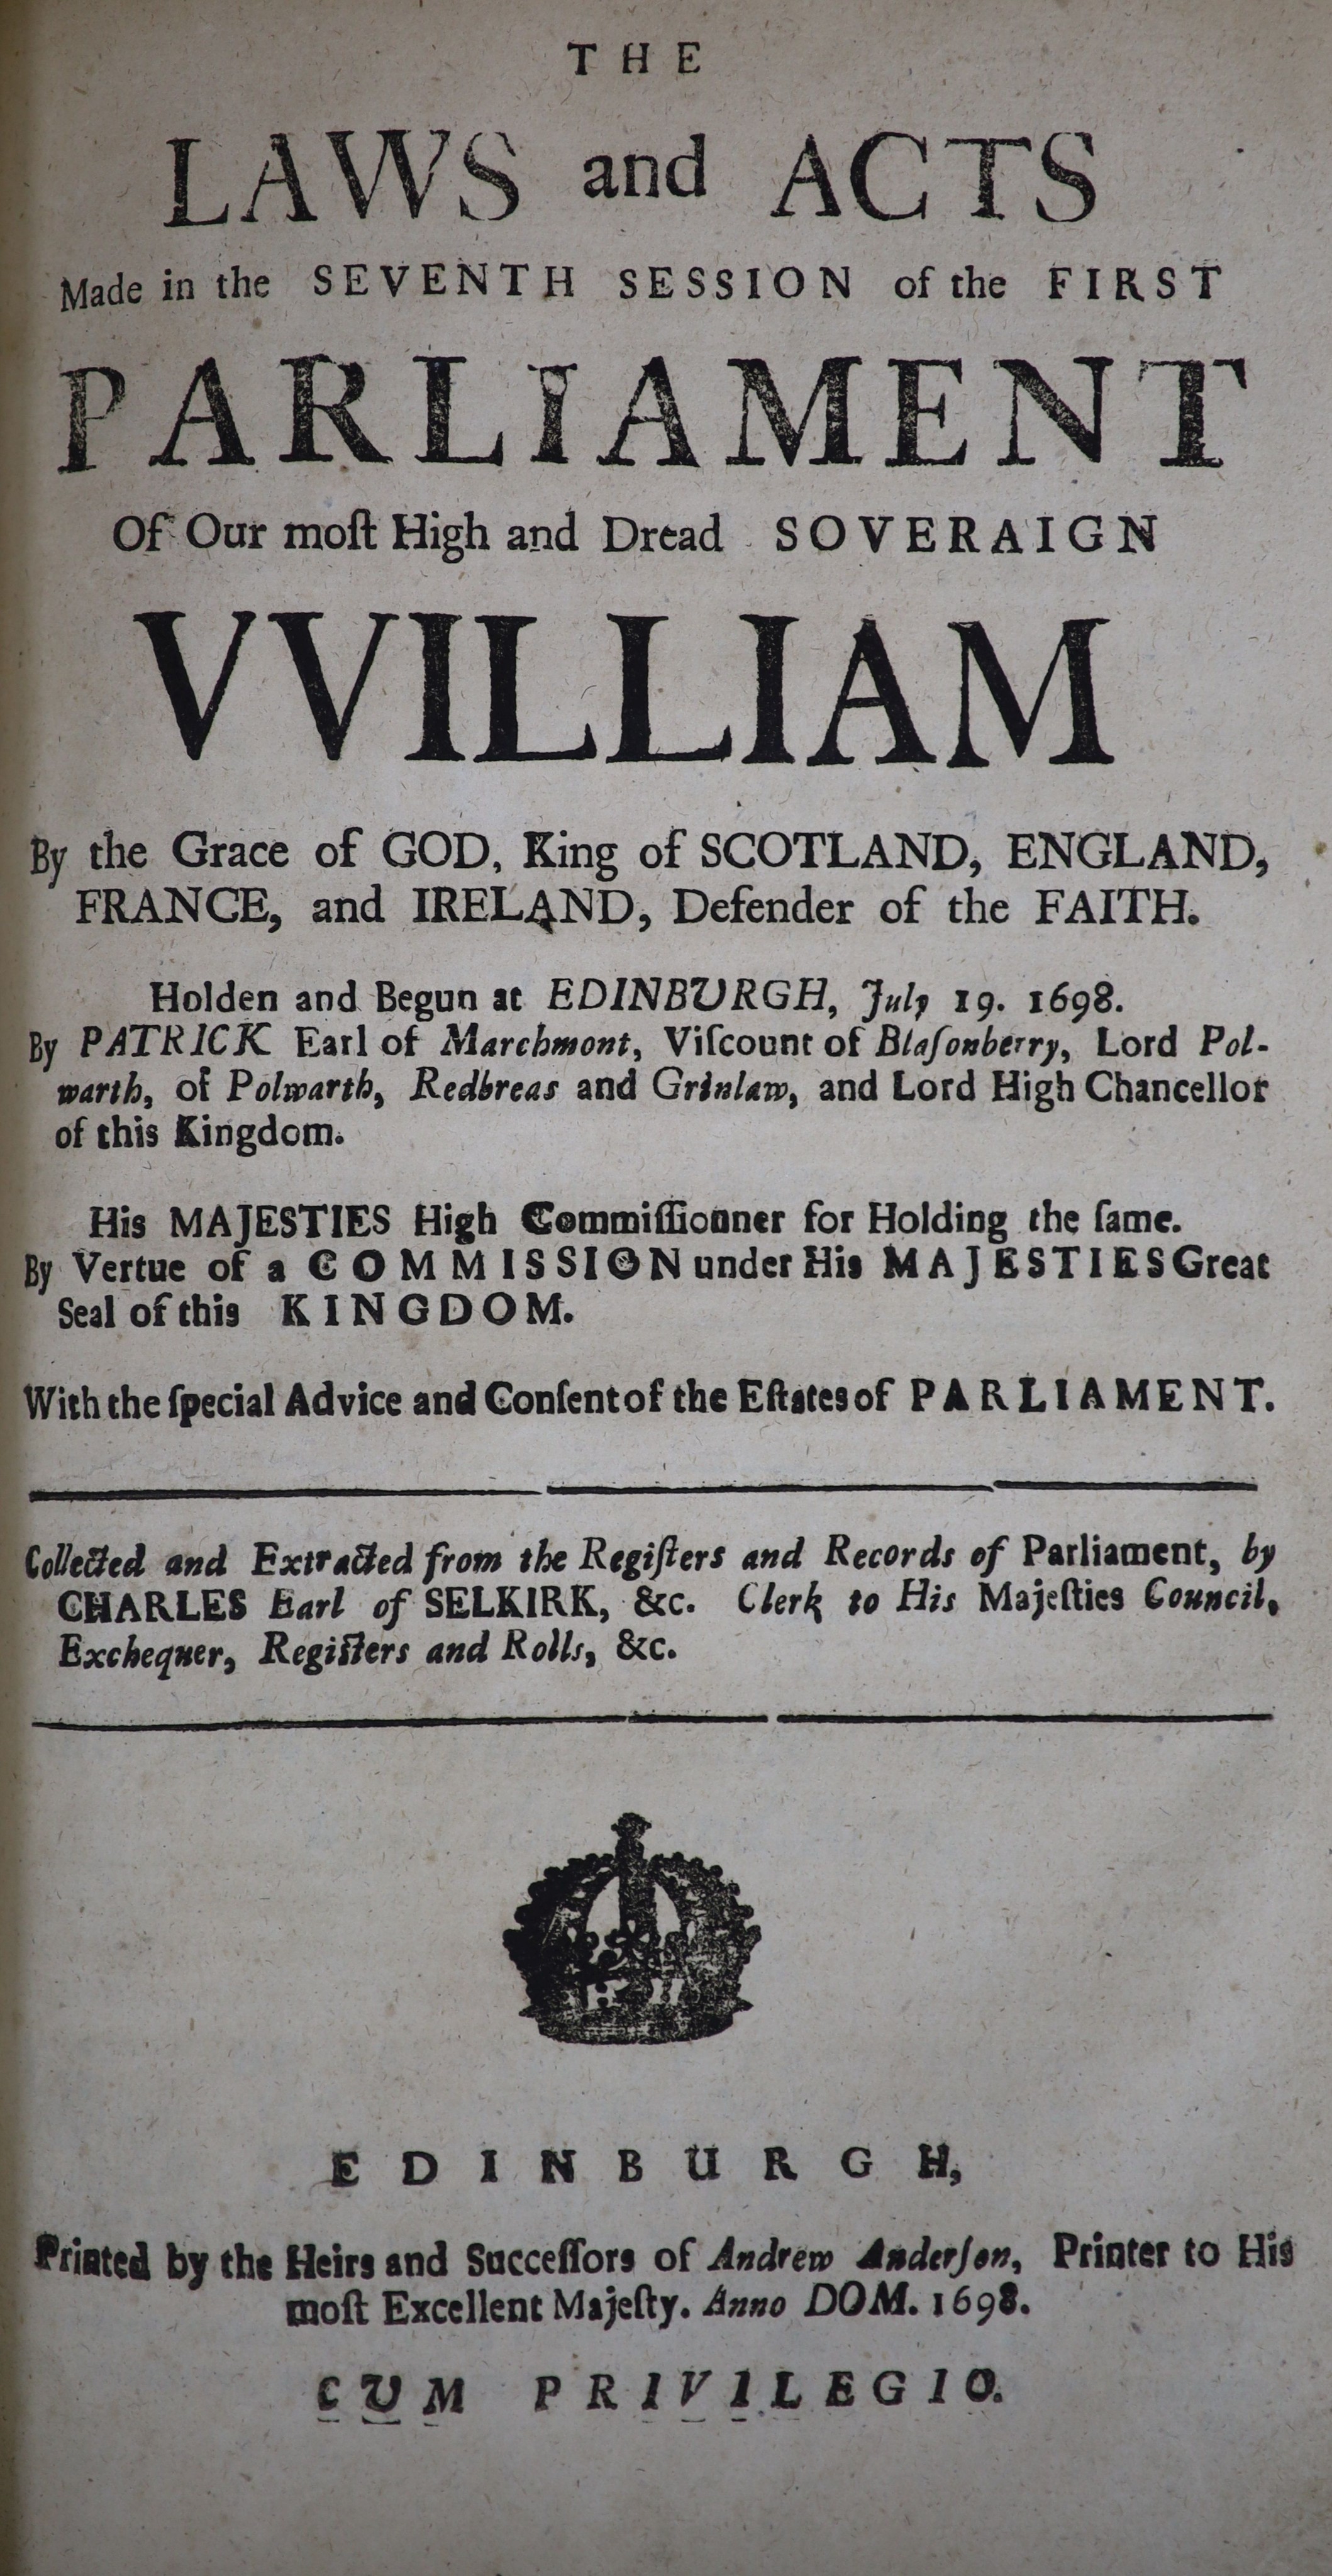 [Scotland] Laws and Acts (of Scotland)' approx. 12 various, William & Mary (1689) - Ann (1707). engraved headpieces and decorated initial letters; includes (January 1707) 'Act Ratifying and Approving the Treaty of Union